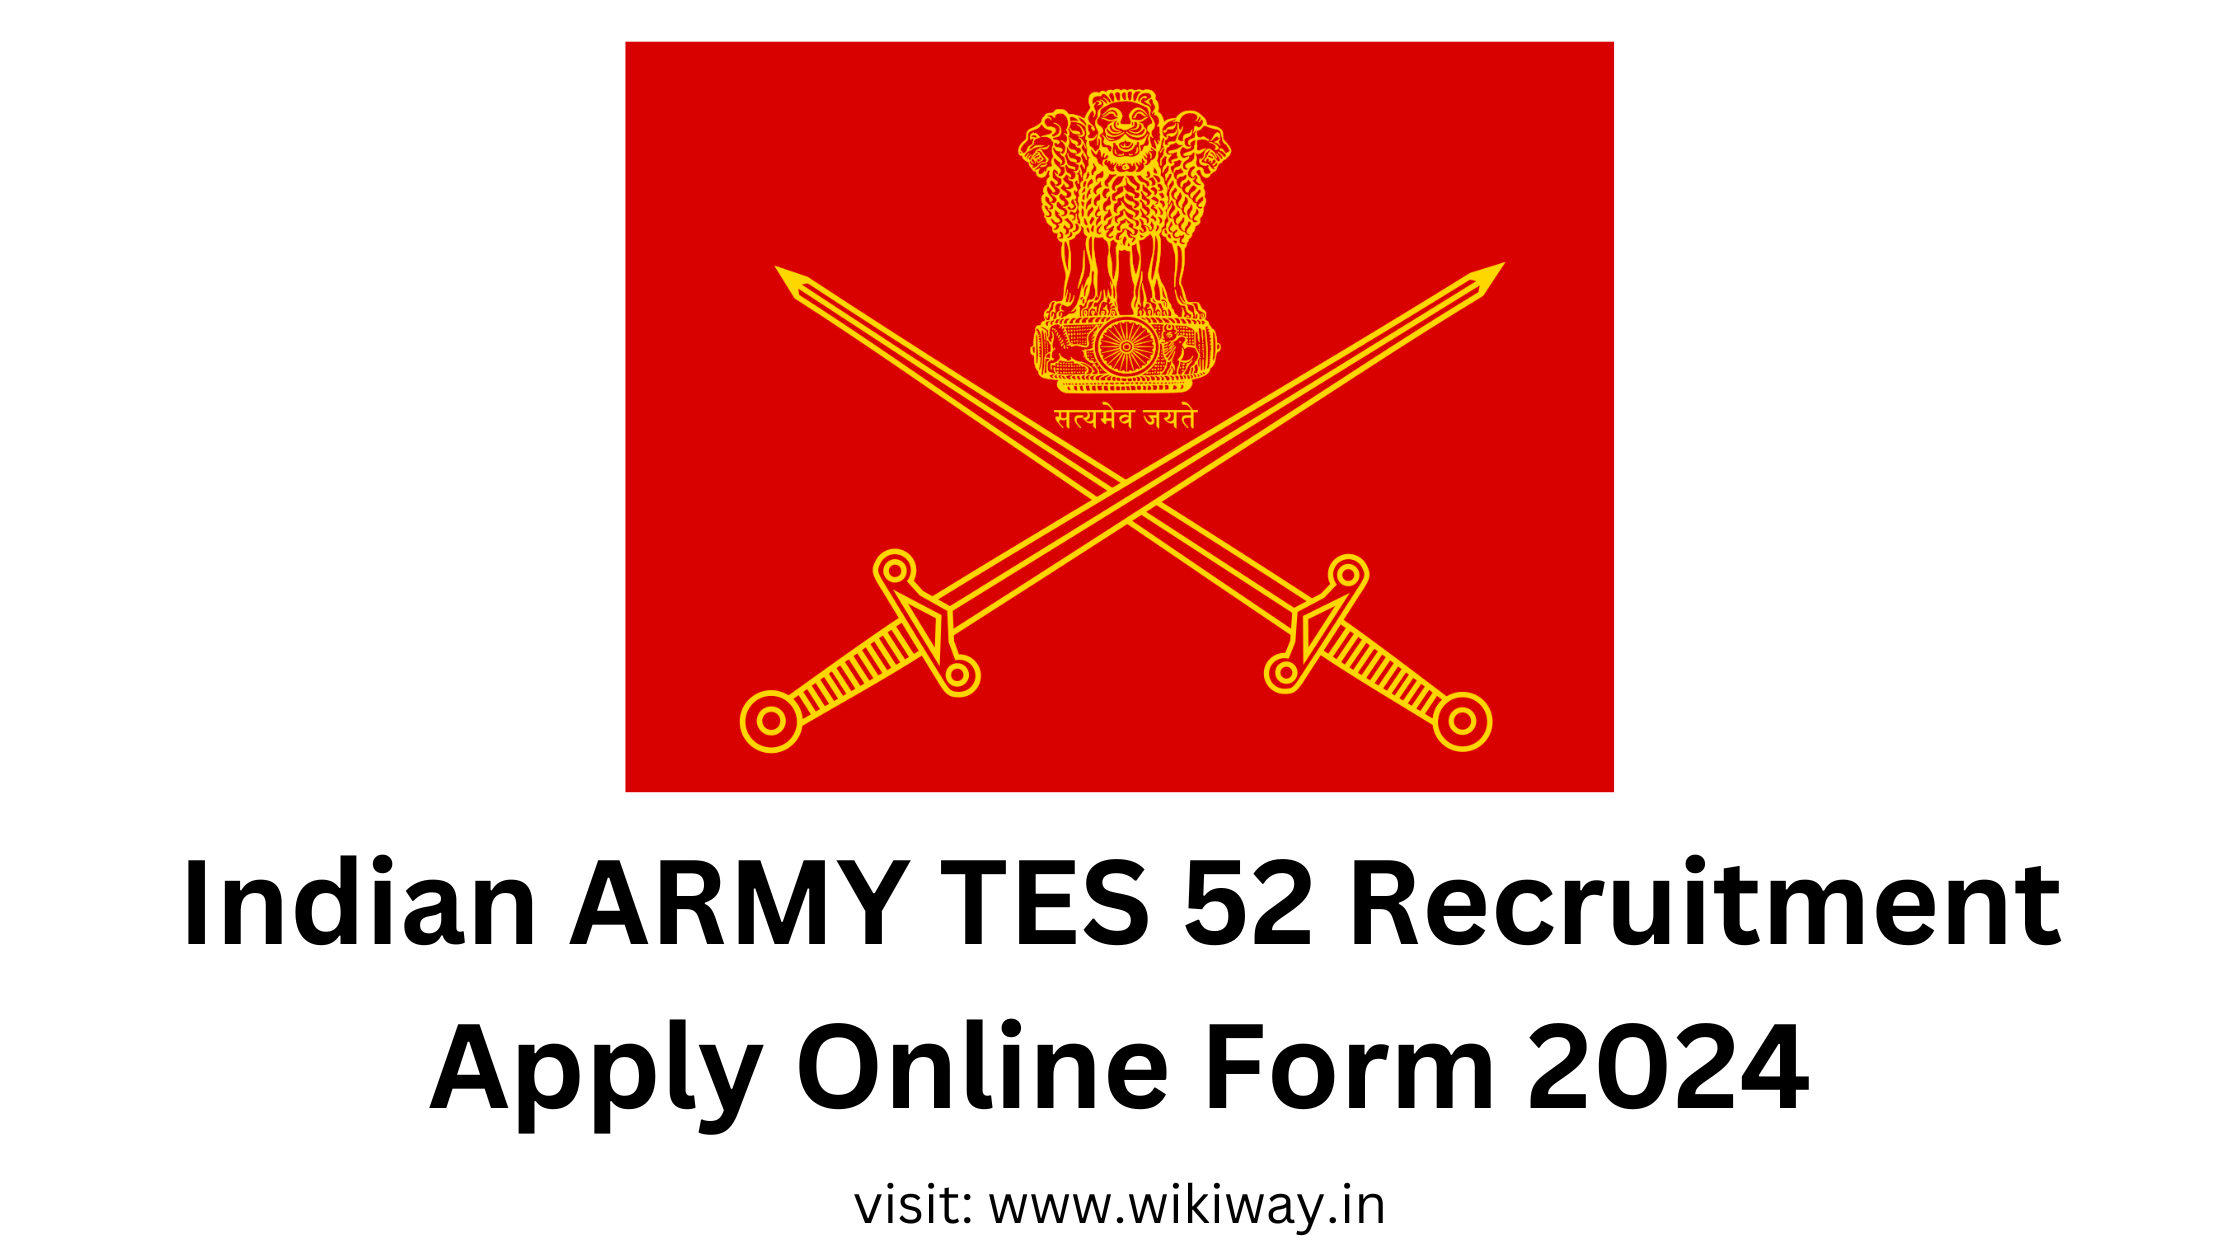 Indian ARMY TES 52 Recruitment Apply Online Form 2024